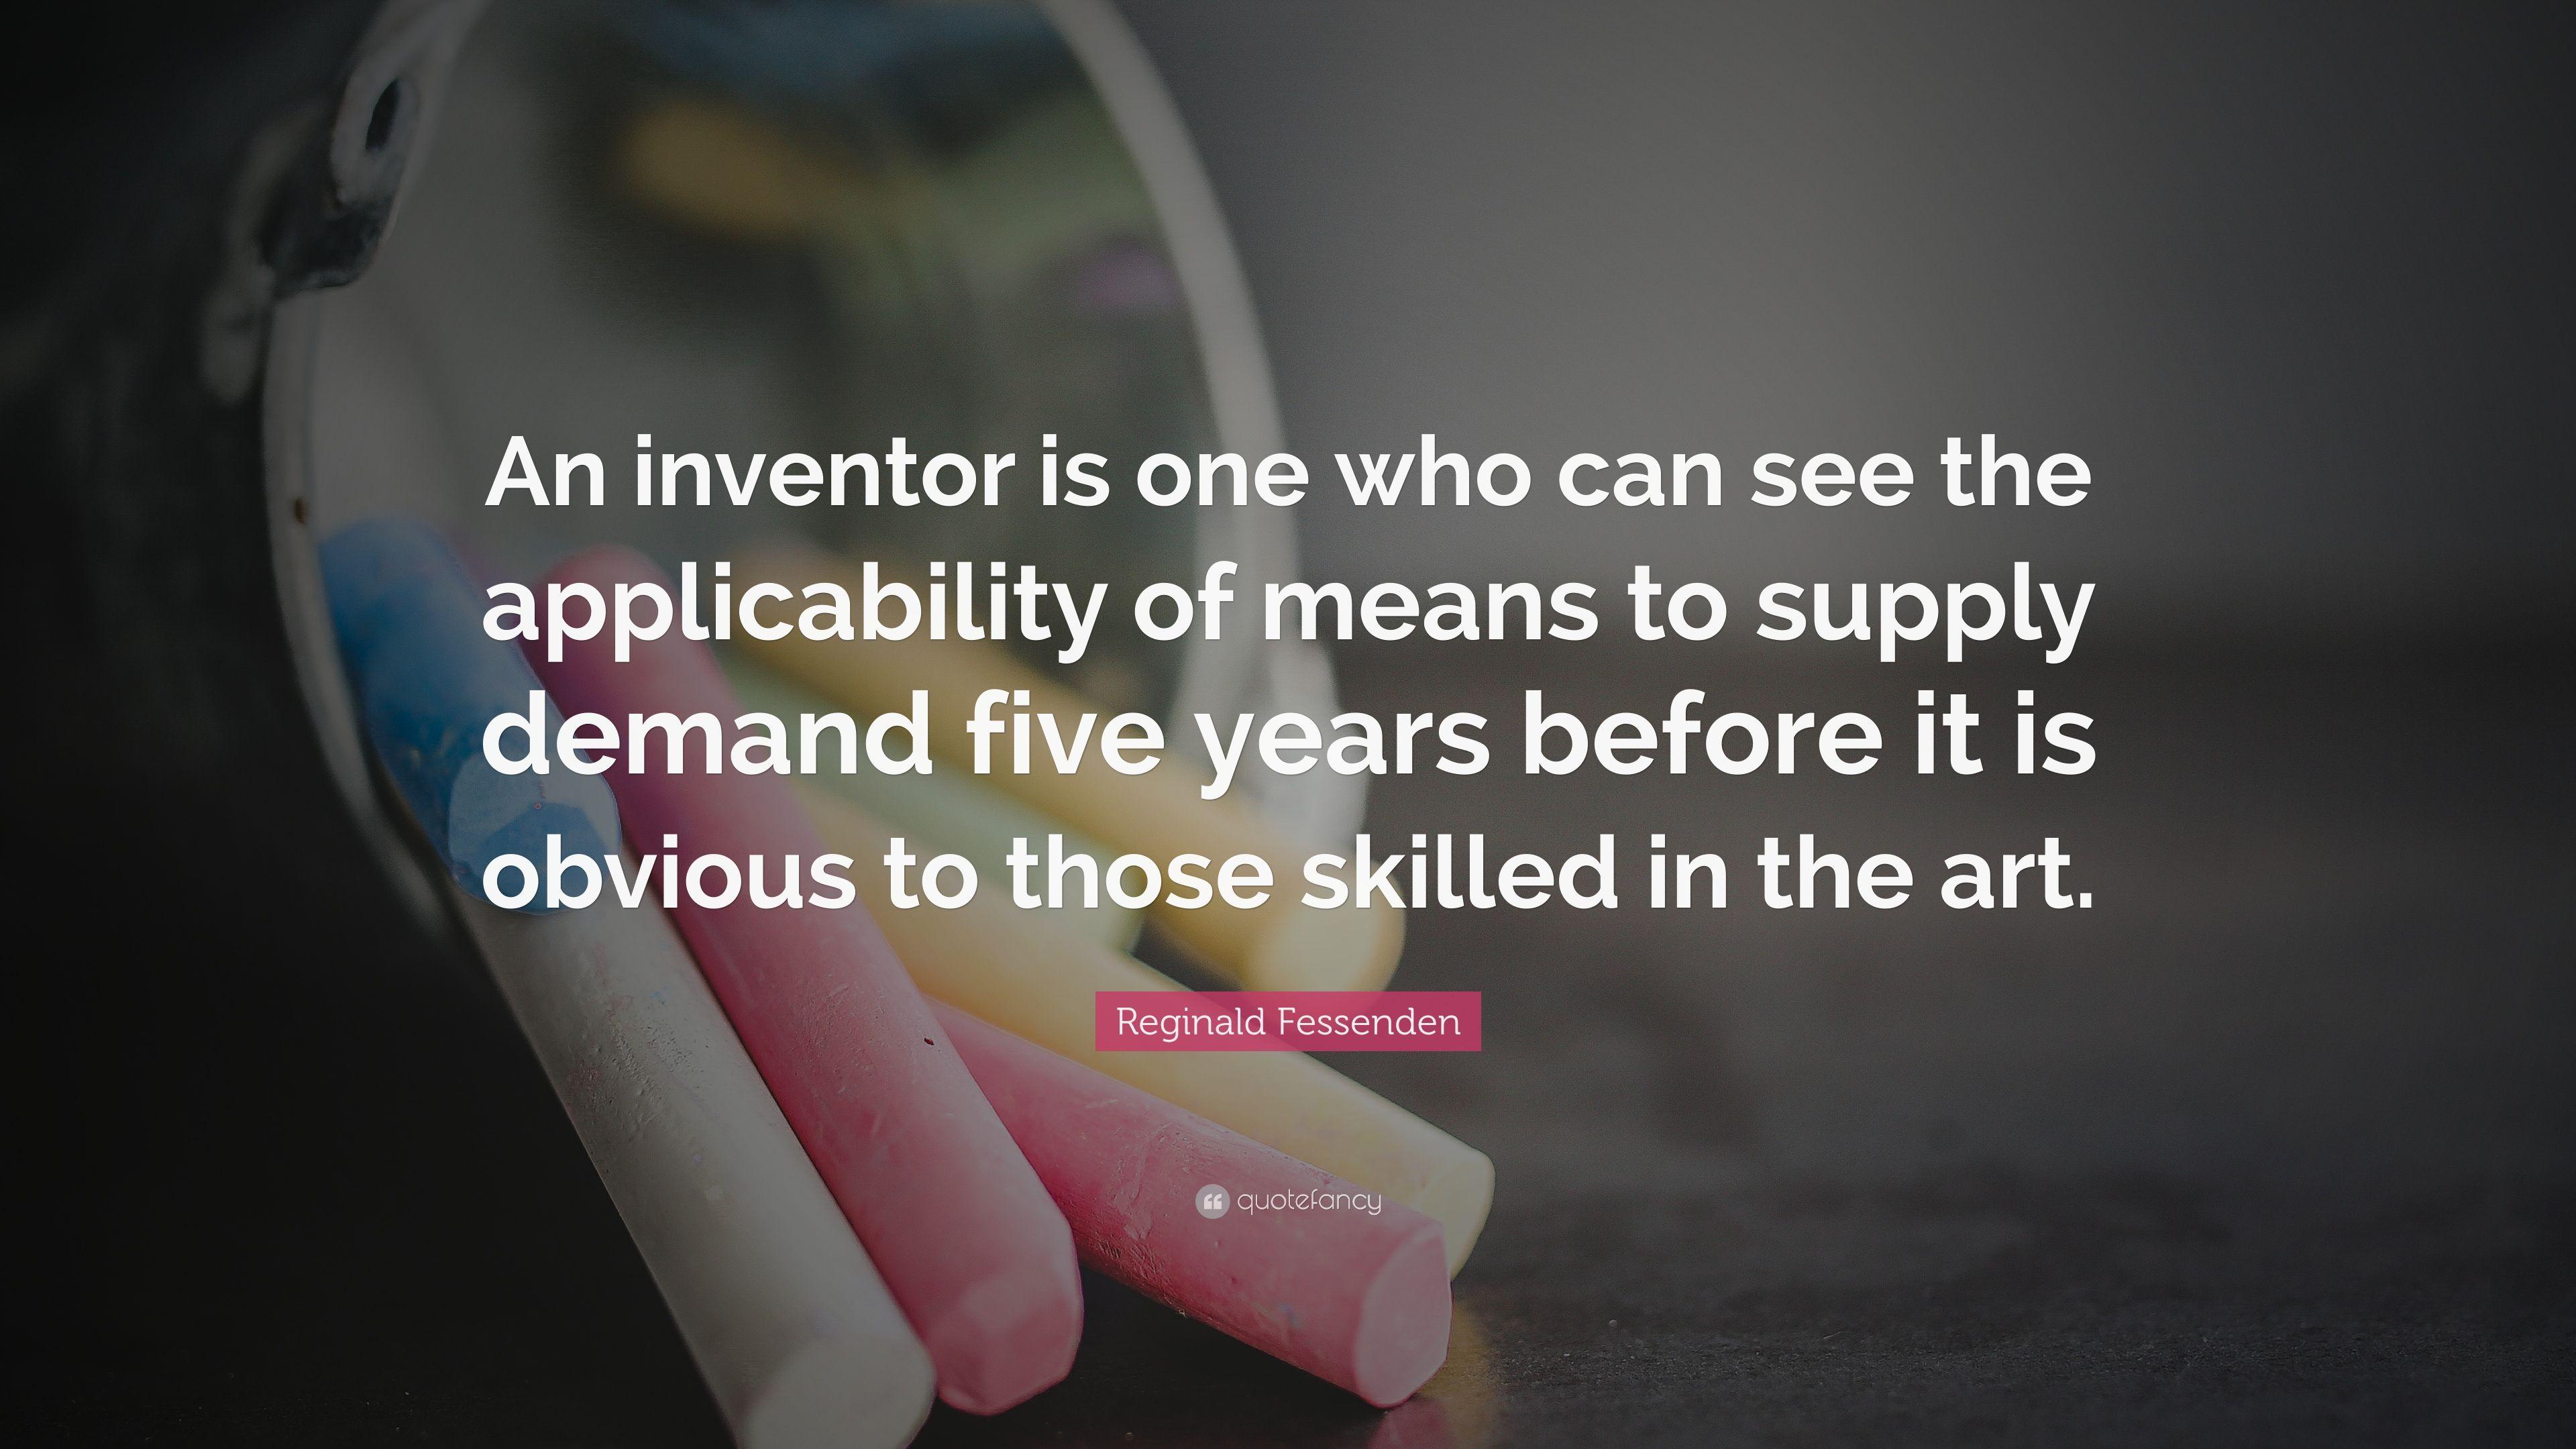 Reginald Fessenden Quote: “An inventor is one who can see